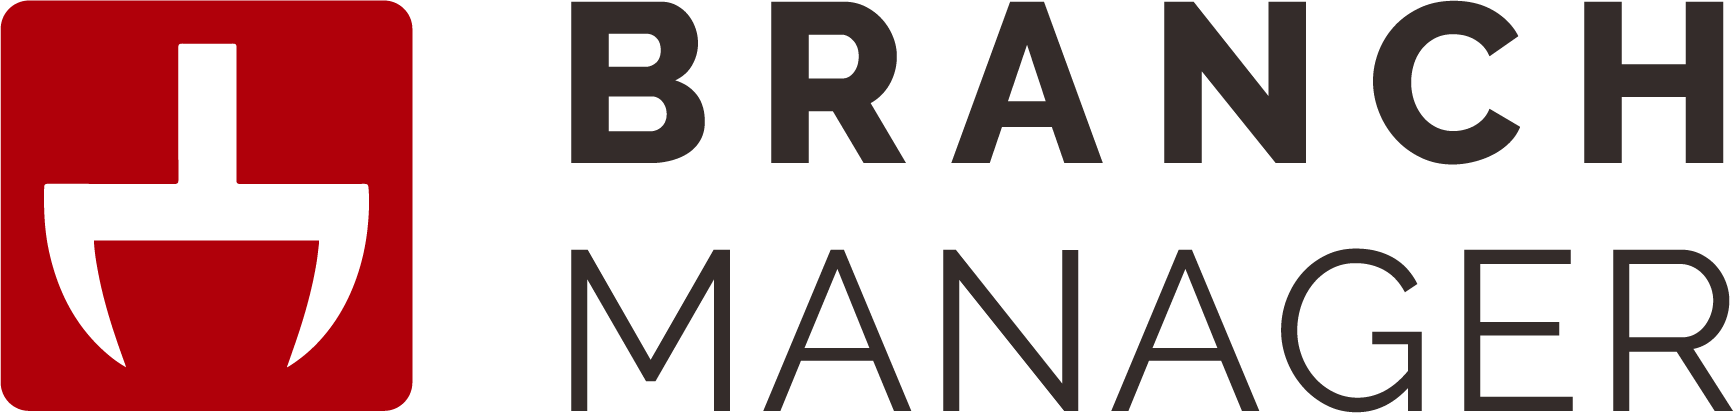 Branch Manager full logo with symbol and company name